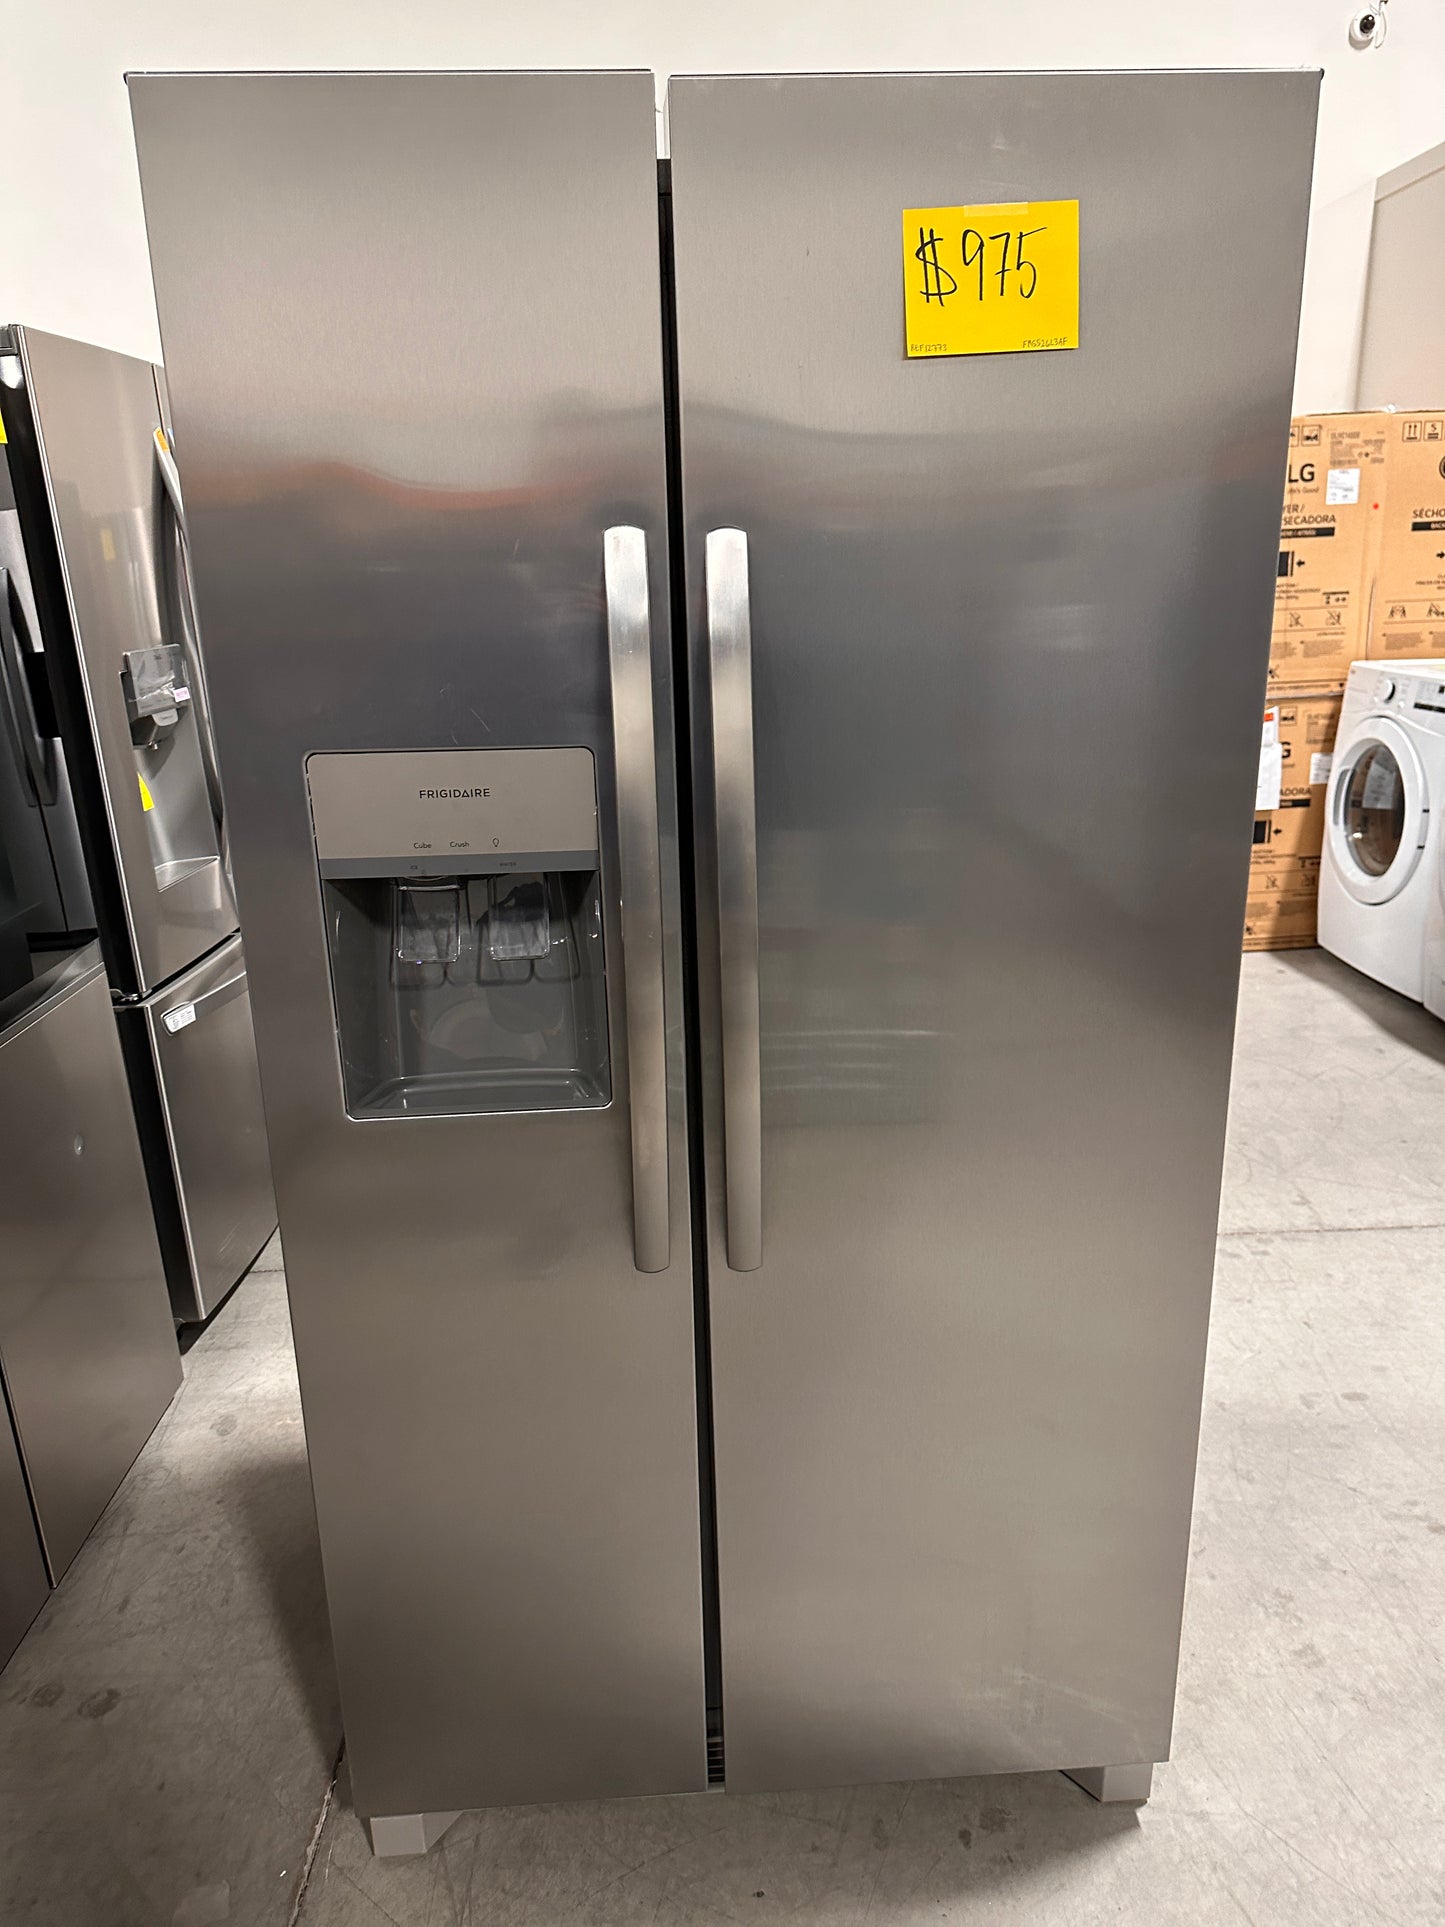 SIDE-BY-SIDE STAINLESS STEEL REFRIGERATOR - REF12773 FRSS2623AS